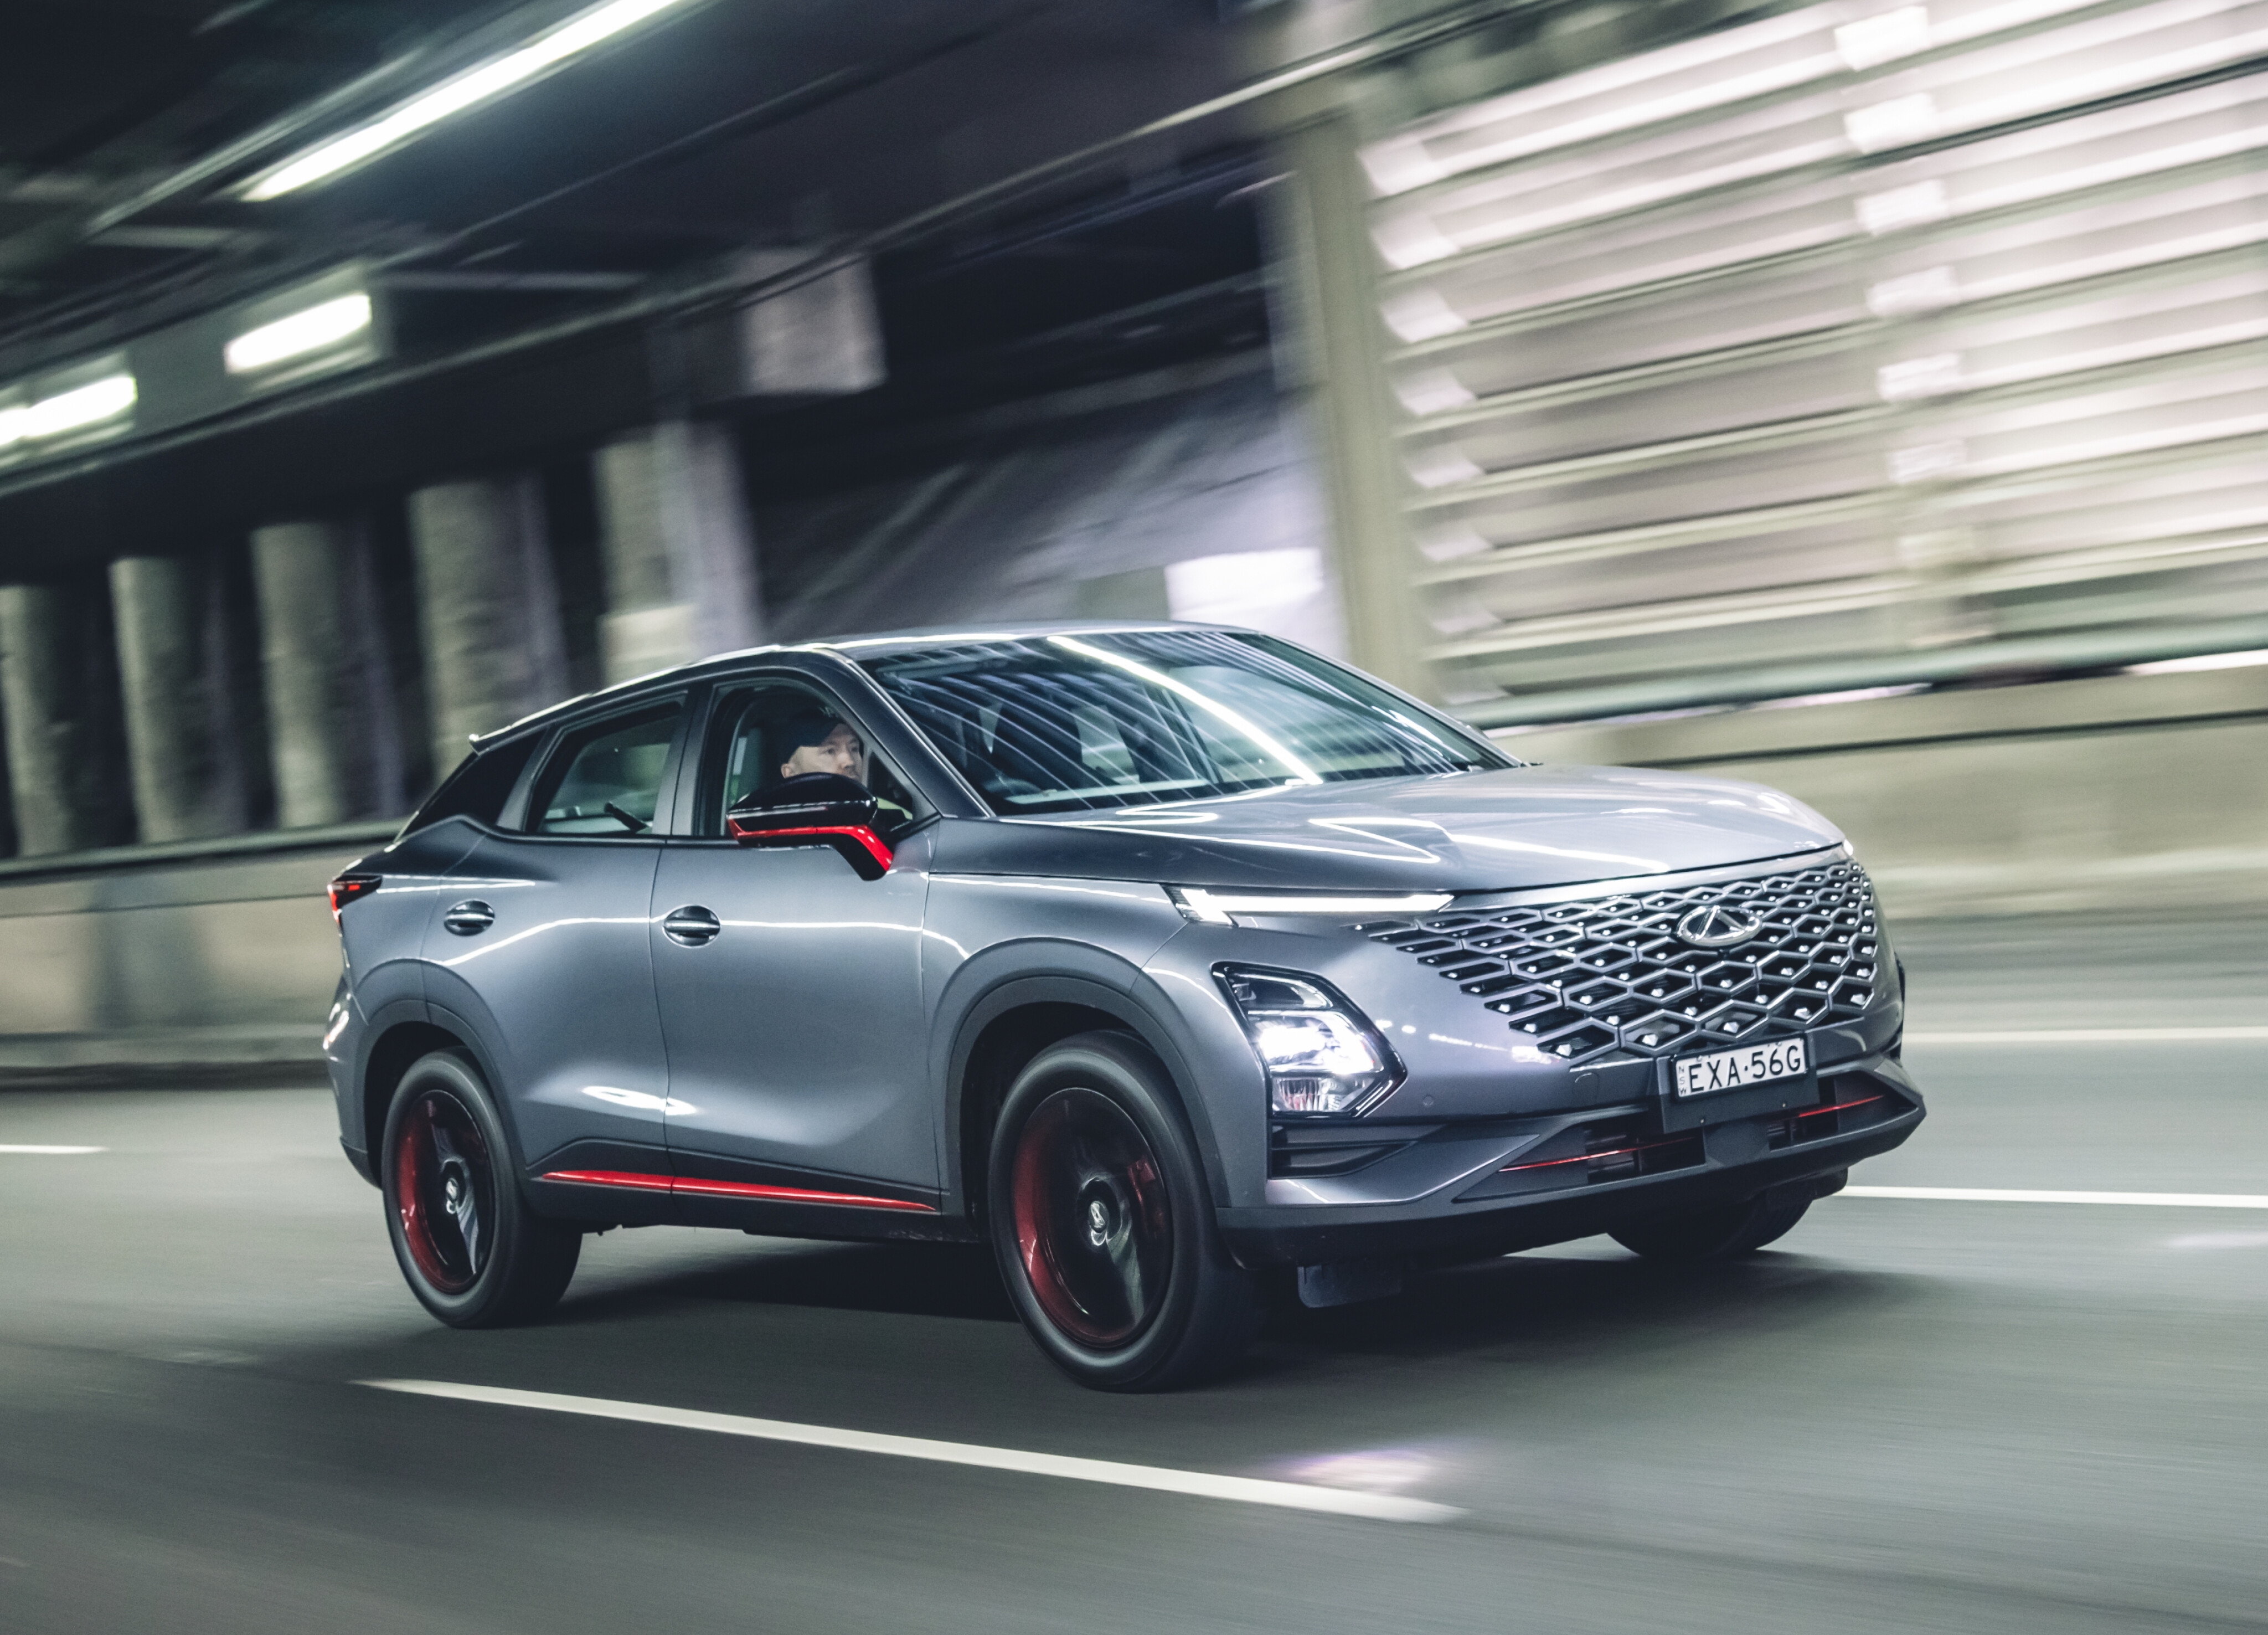 Haval H6 GT Is Coming To Australia As A Premium Coupe-SUV For The